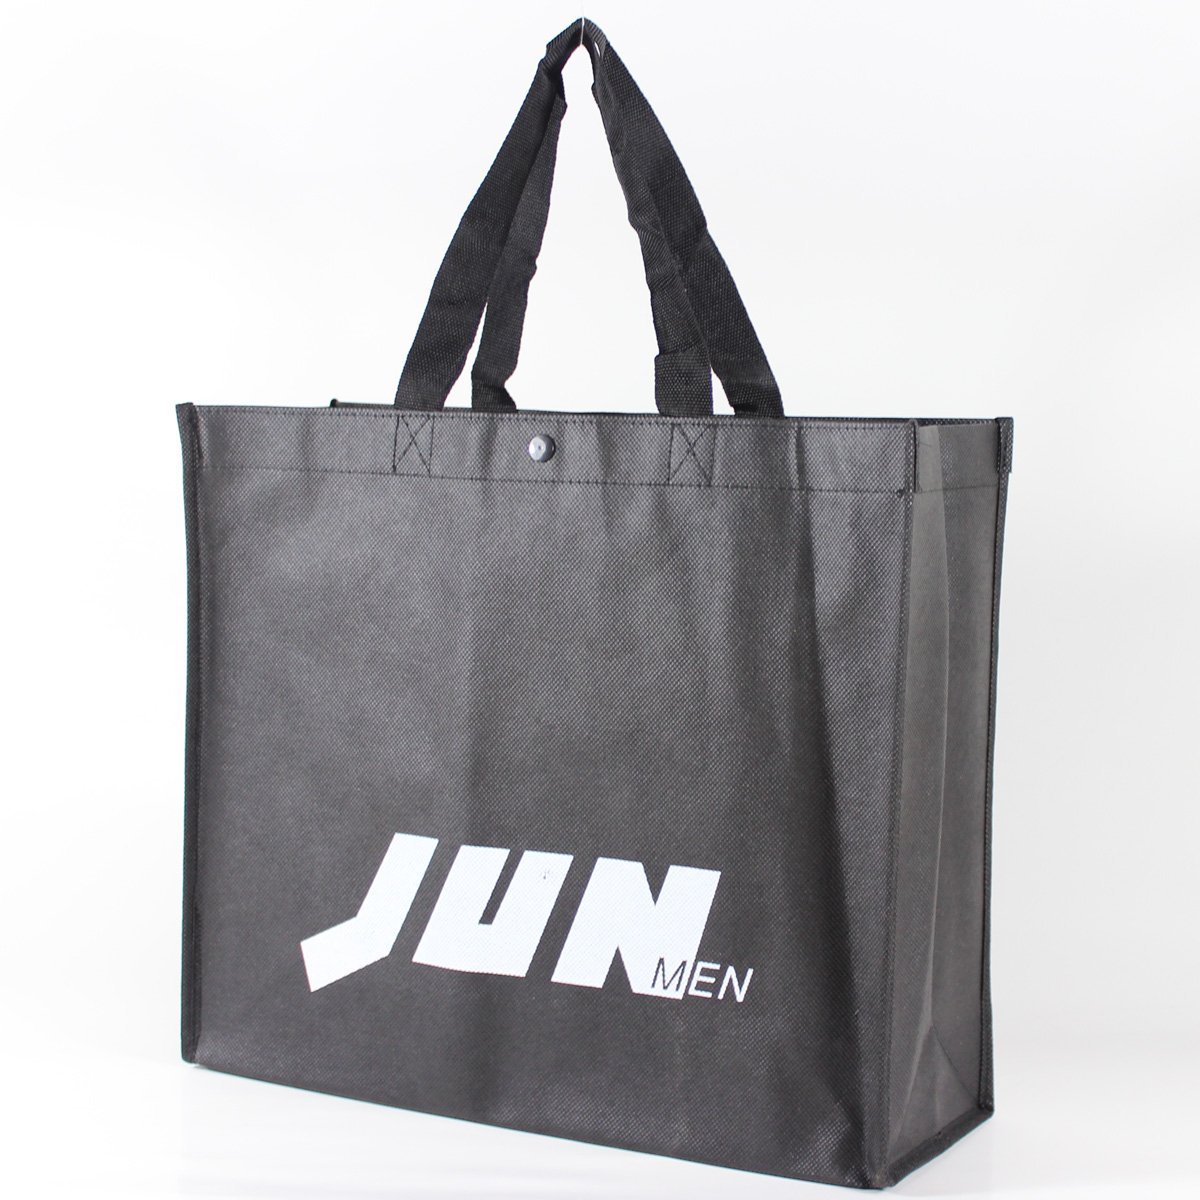 Promotional Nonwoven bag